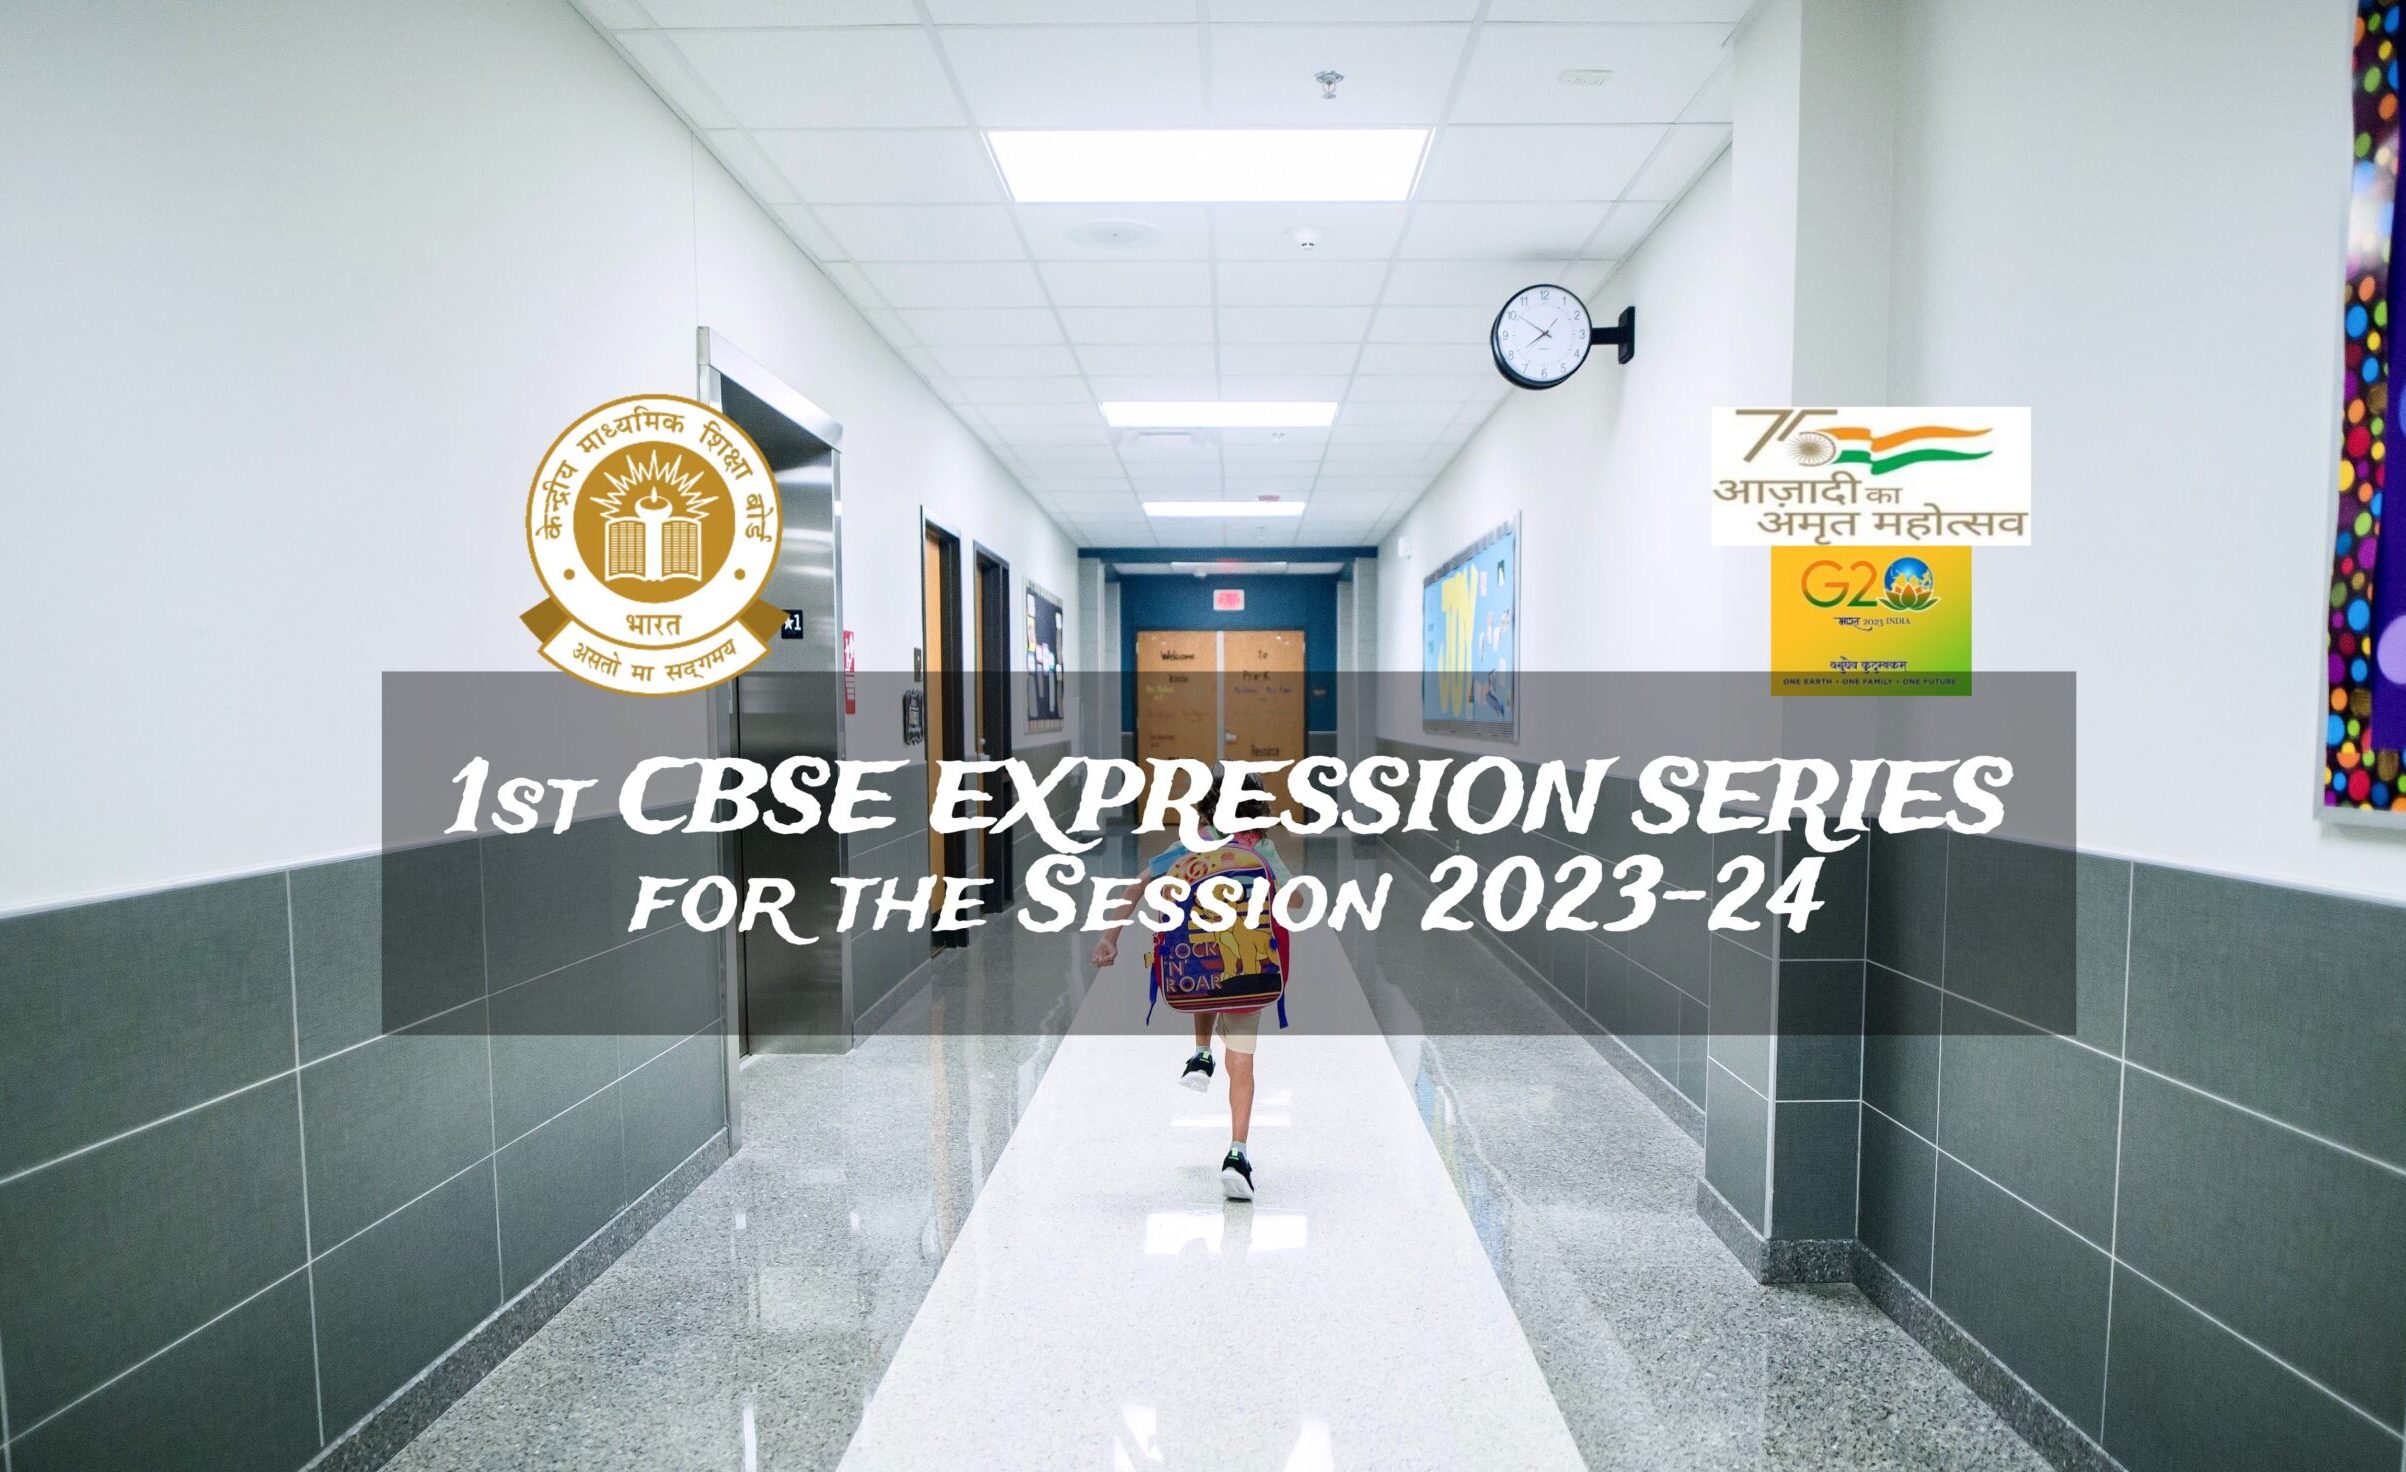 CBSE Expression Series 2023-24: Skill Development in India from Local to Global